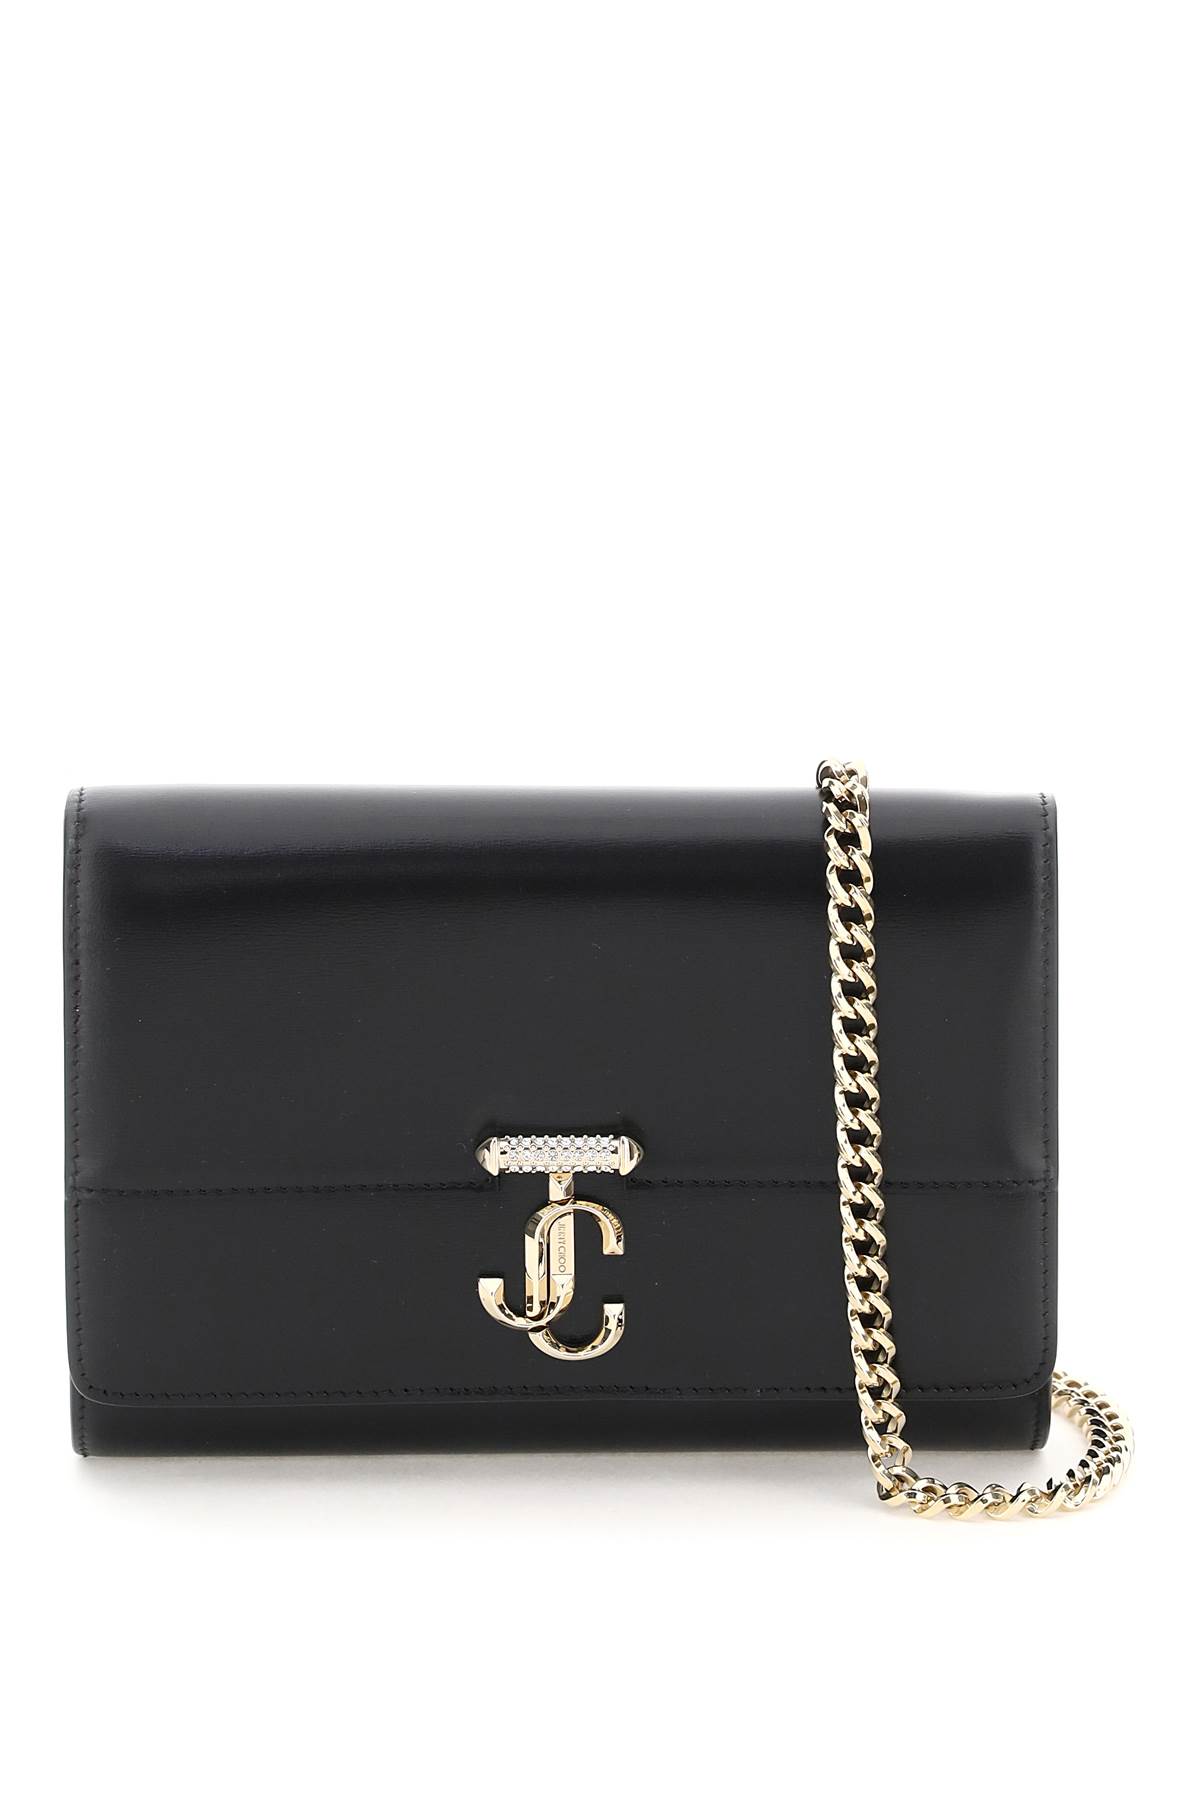 Jimmy Choo Varenne Leather Clutch With Strap